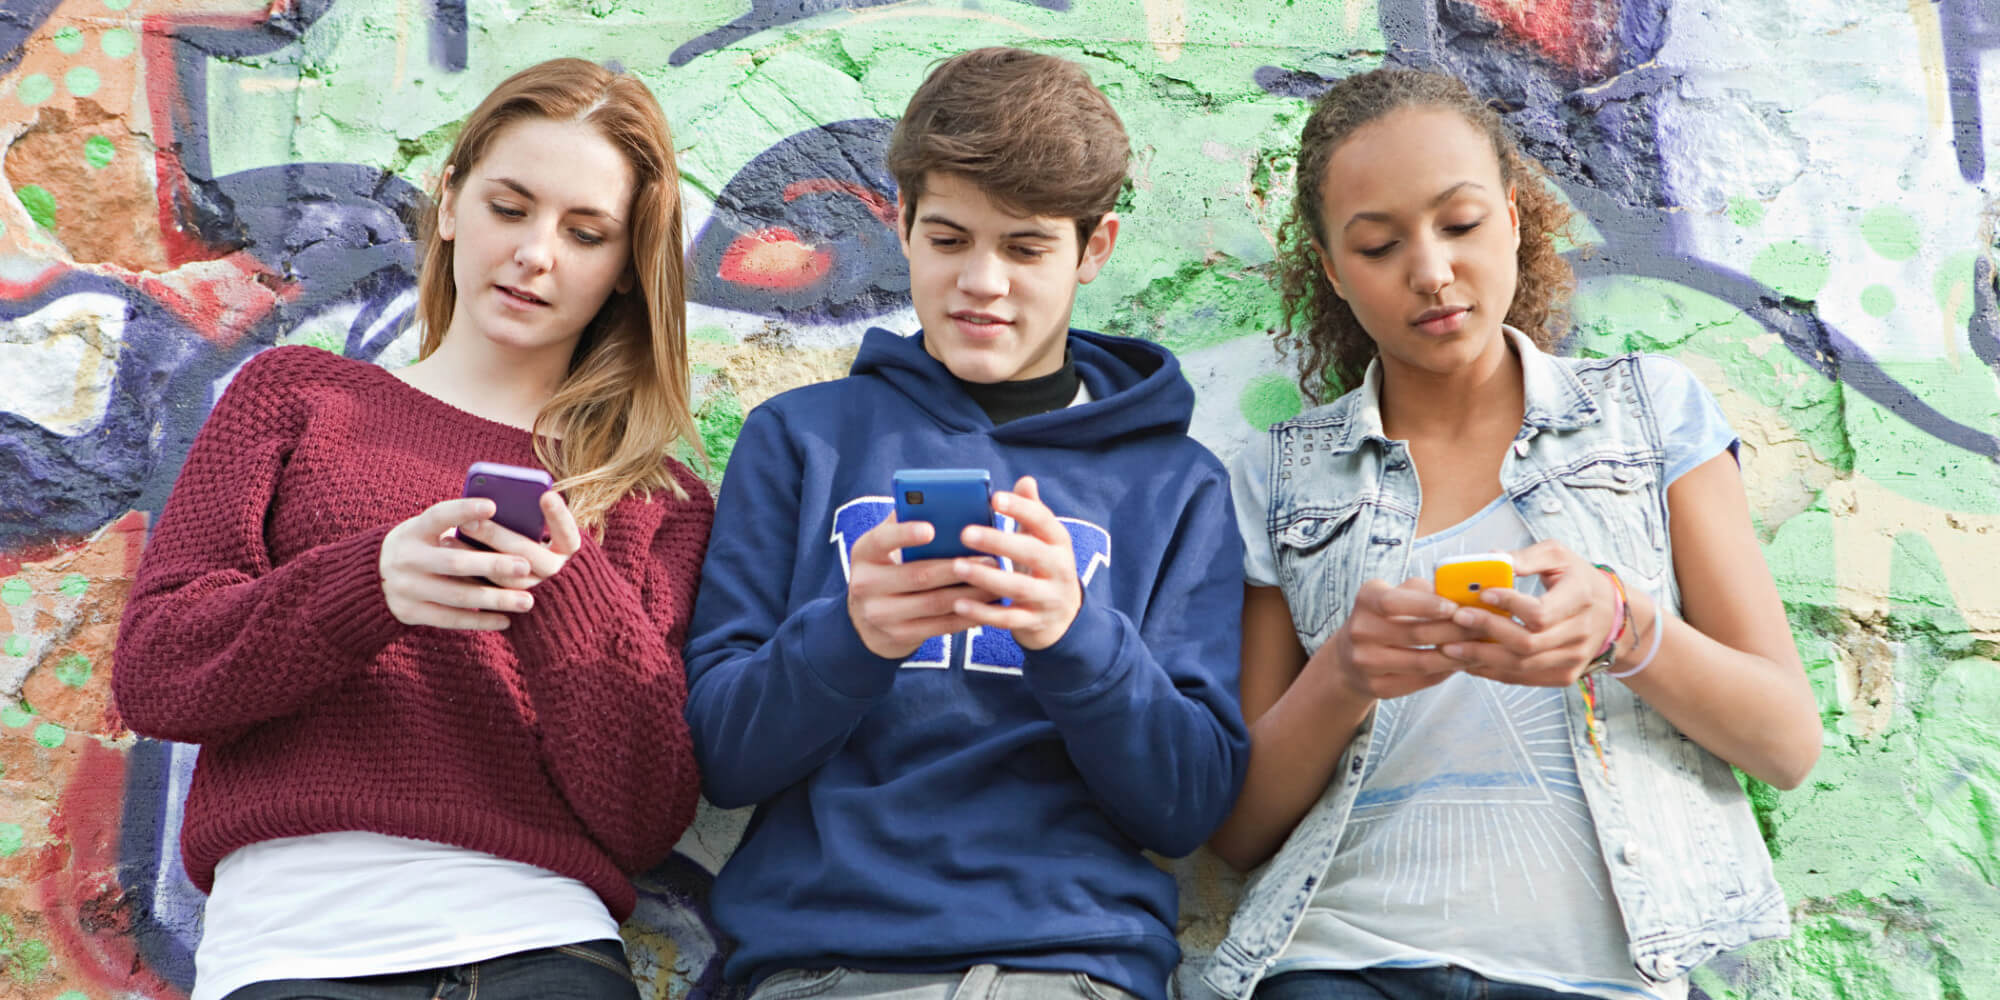 Utah social media law will require parental permission for teens to open accounts